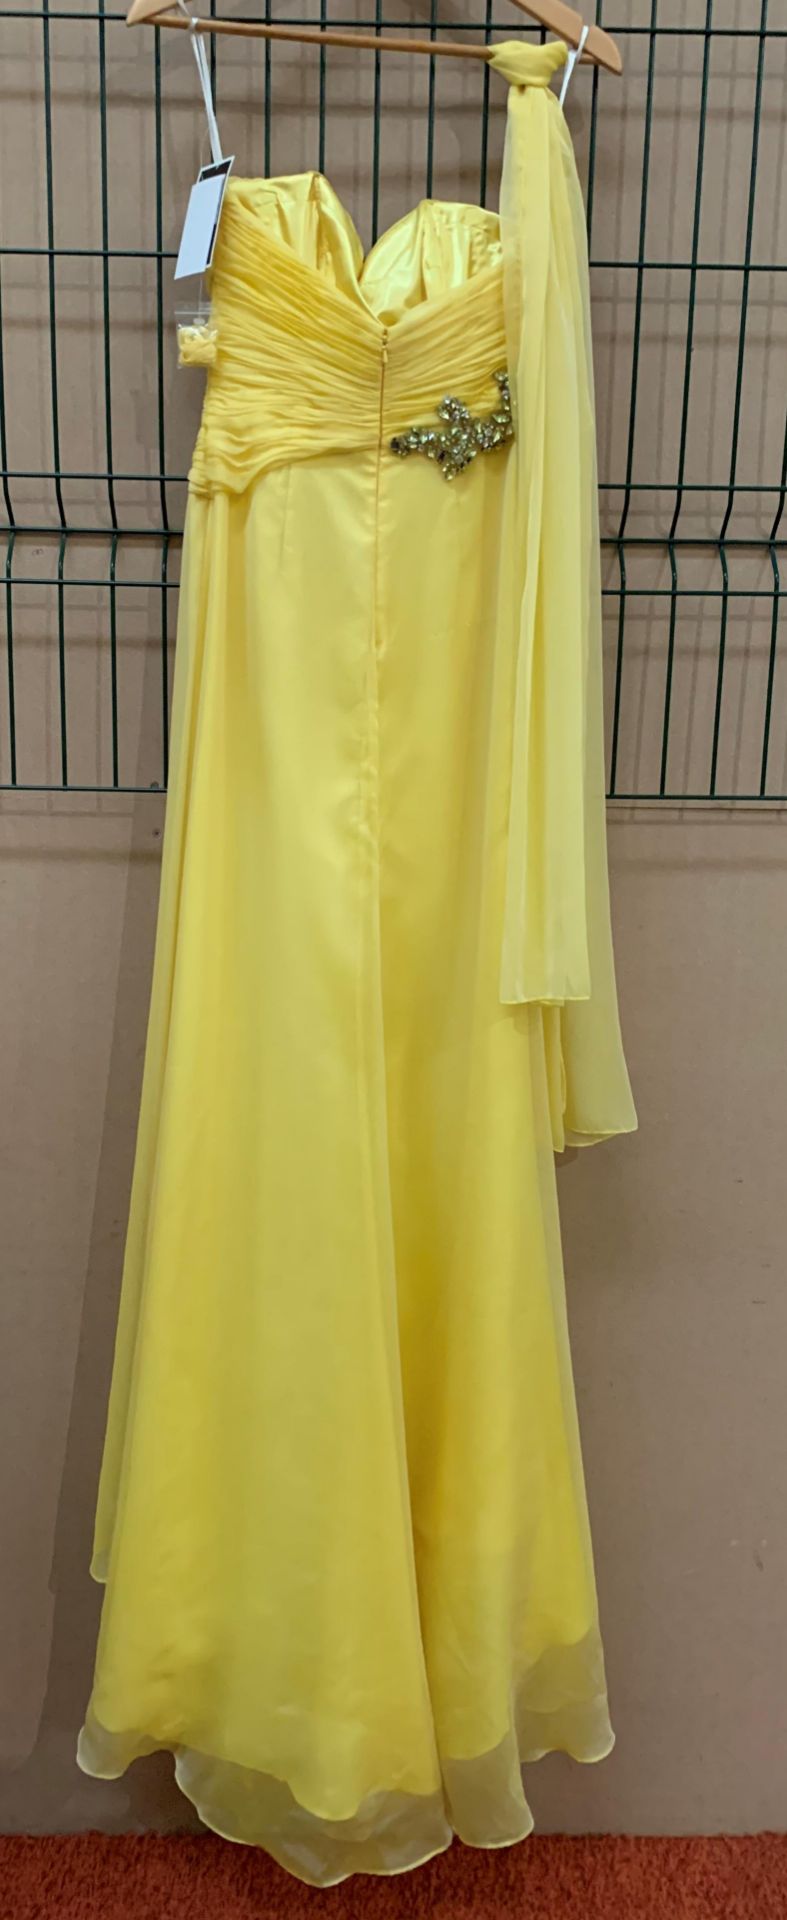 A bridesmaid/prom dress by Forever Yours, Katrina, yellow, size US 6, - Image 2 of 2